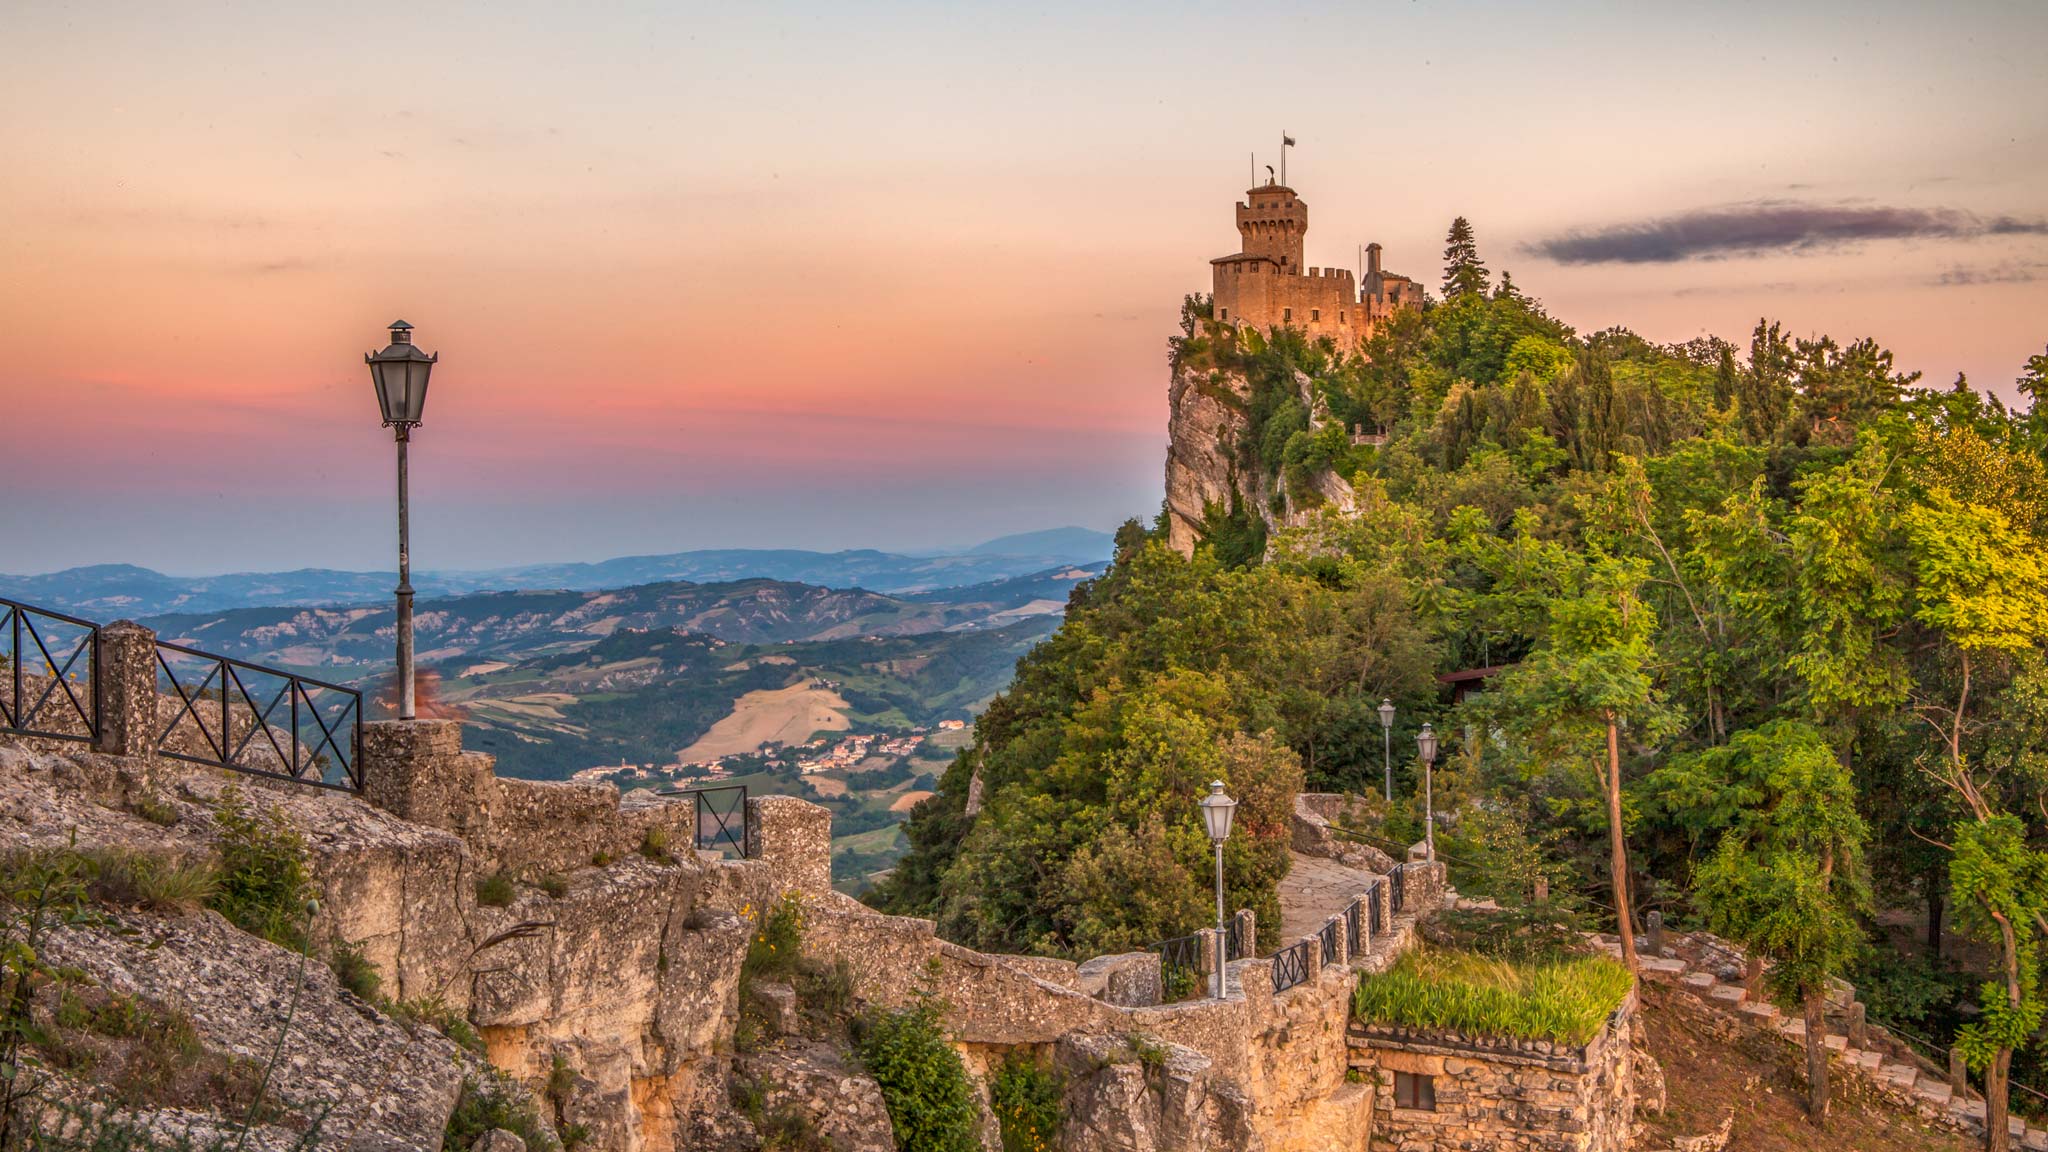 One of the San Marino towers at sunset